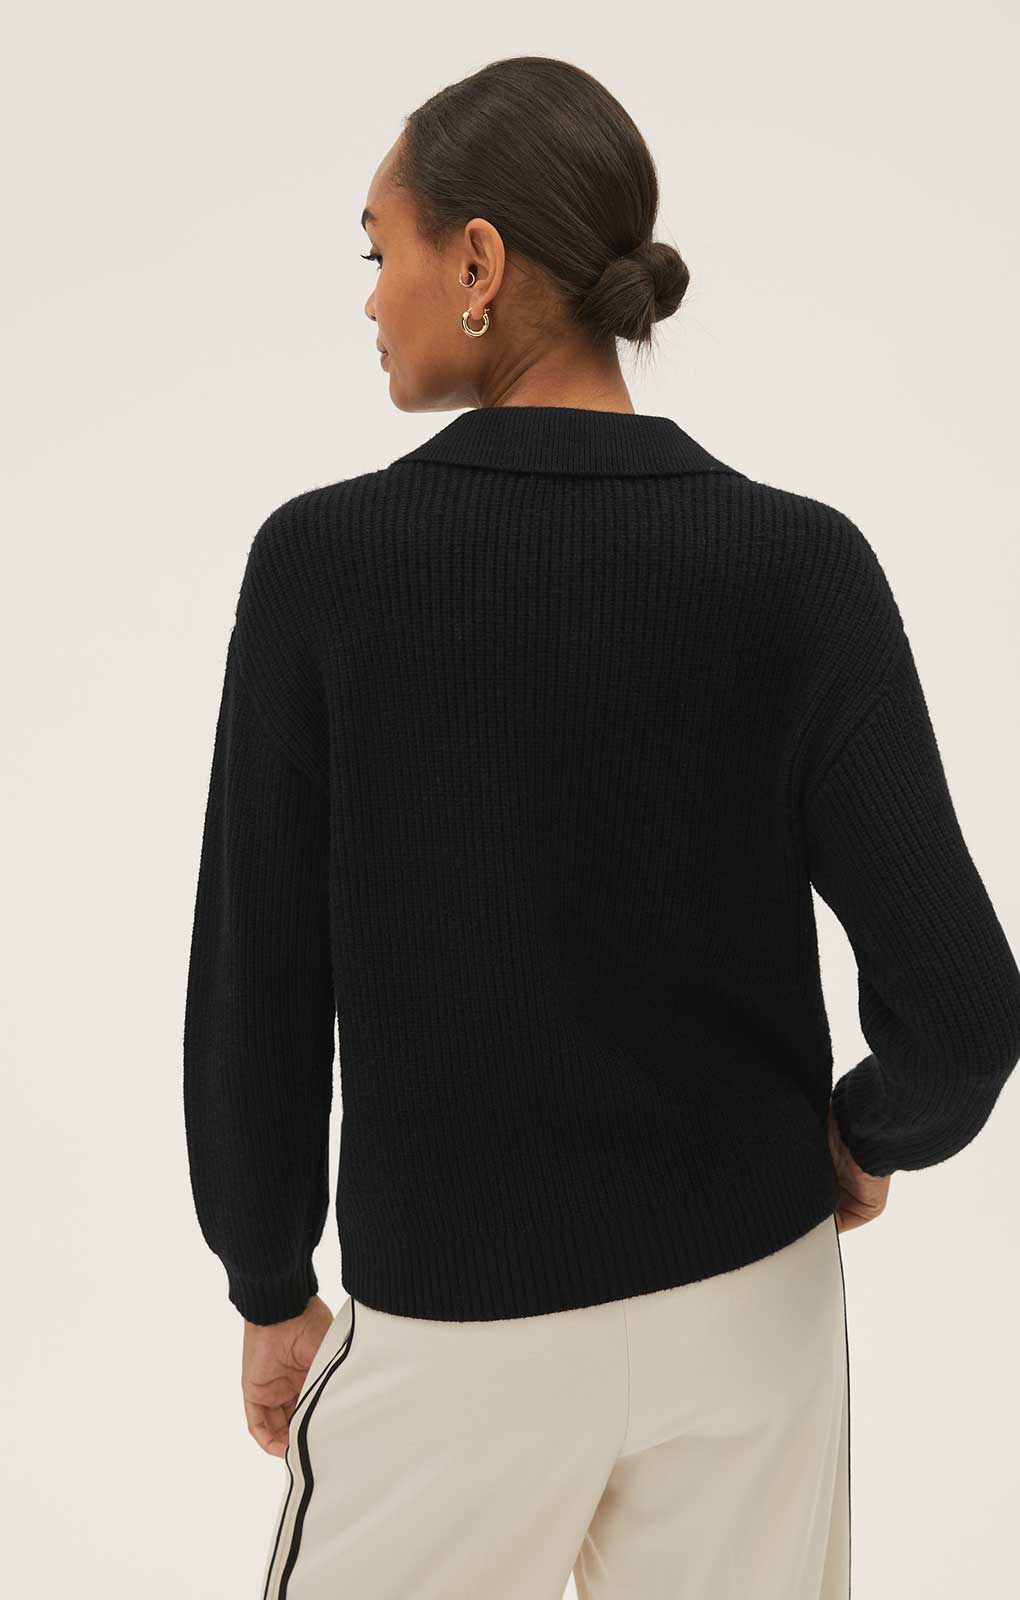 M&S Black Soft Touch Cable Knit Collared Cardigan product image